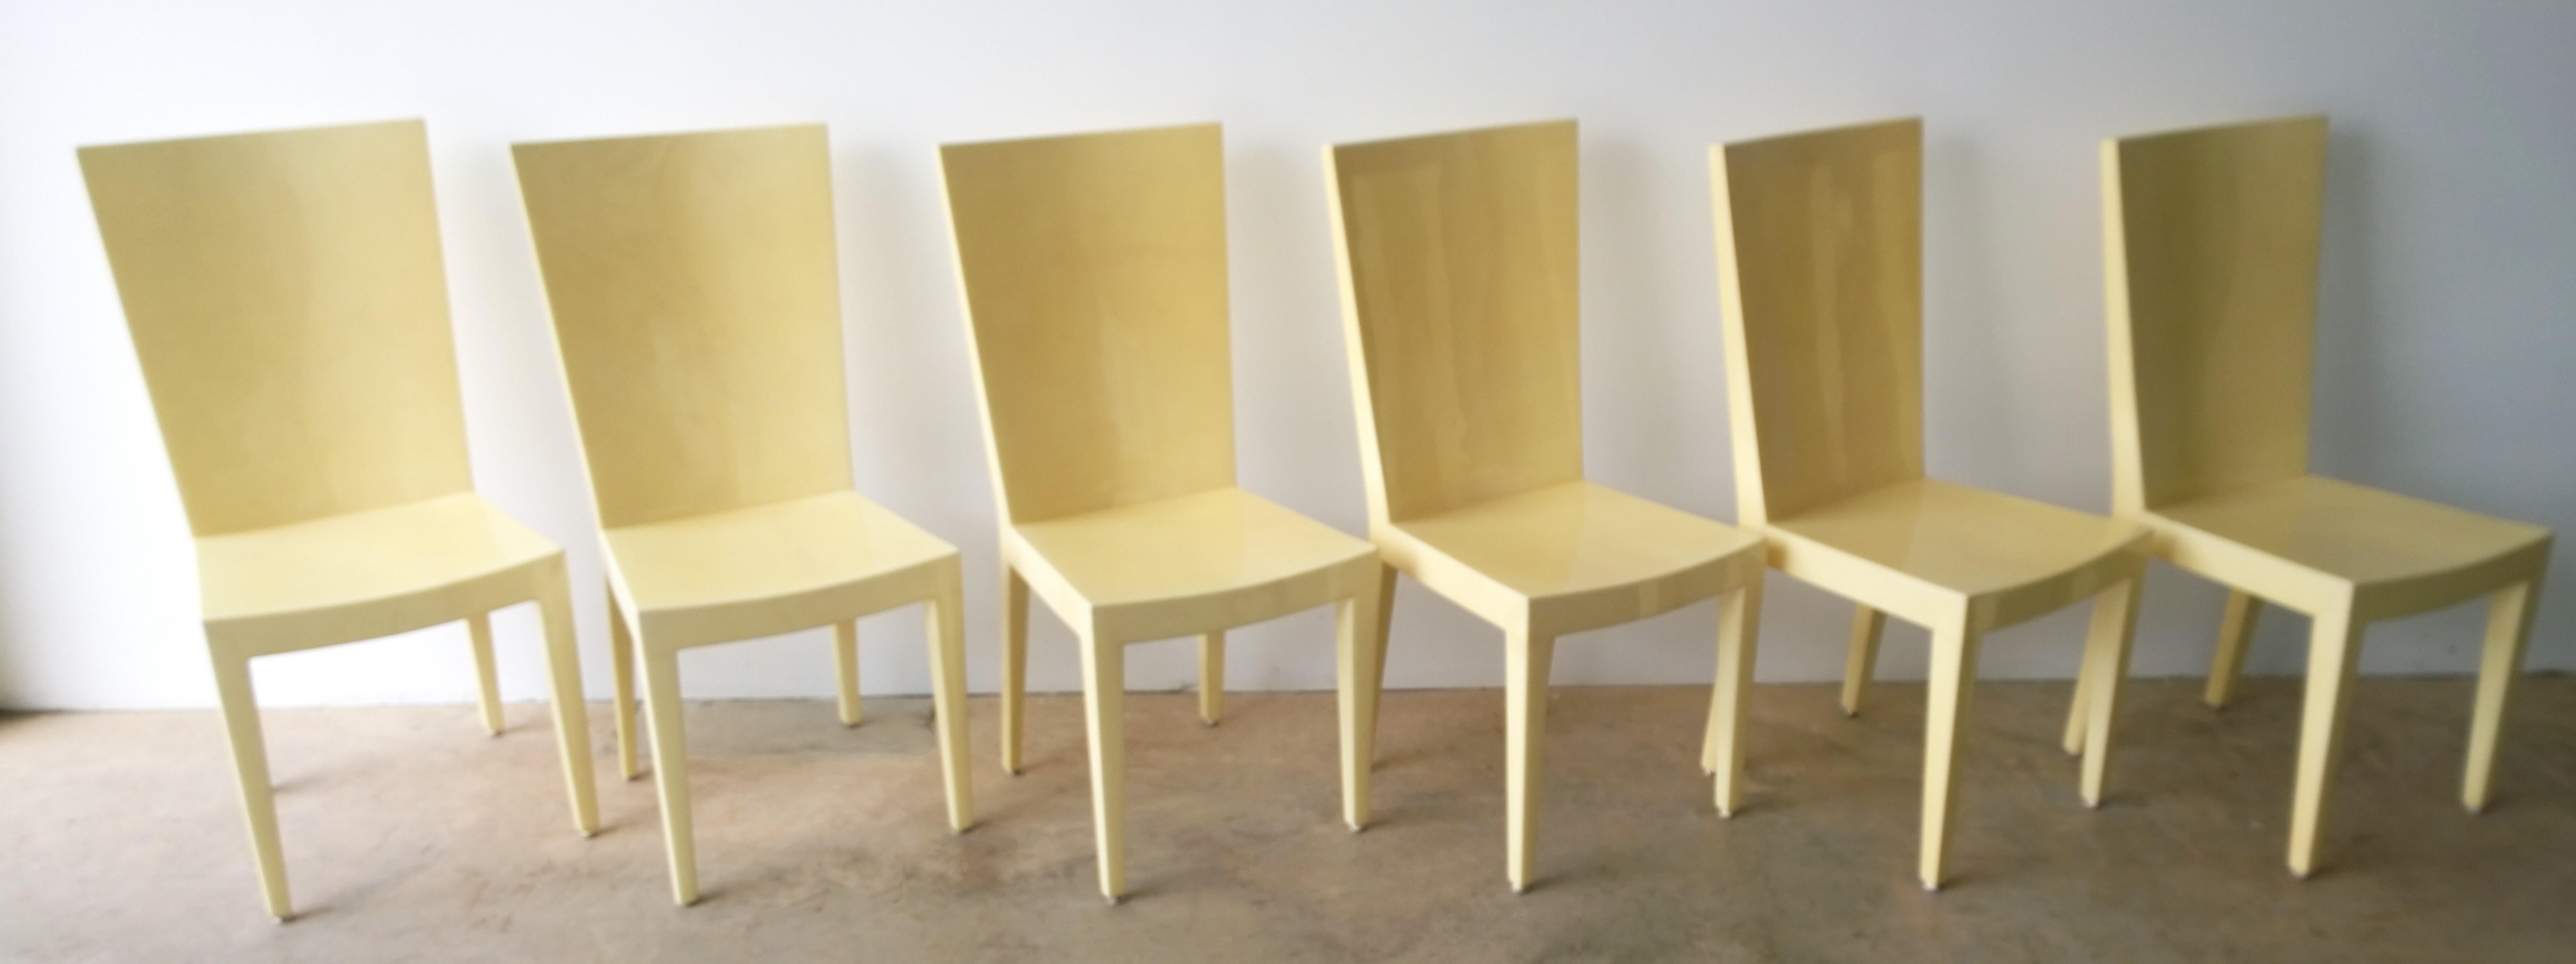 Offered is a Mid-Century Modern Eugenio Escudero attributed set of six lacquered goatskin parchment KMF side / dining chairs in the style of Karl Springer with clear lacquer over natural goatskin. This set of dining chairs exudes modern